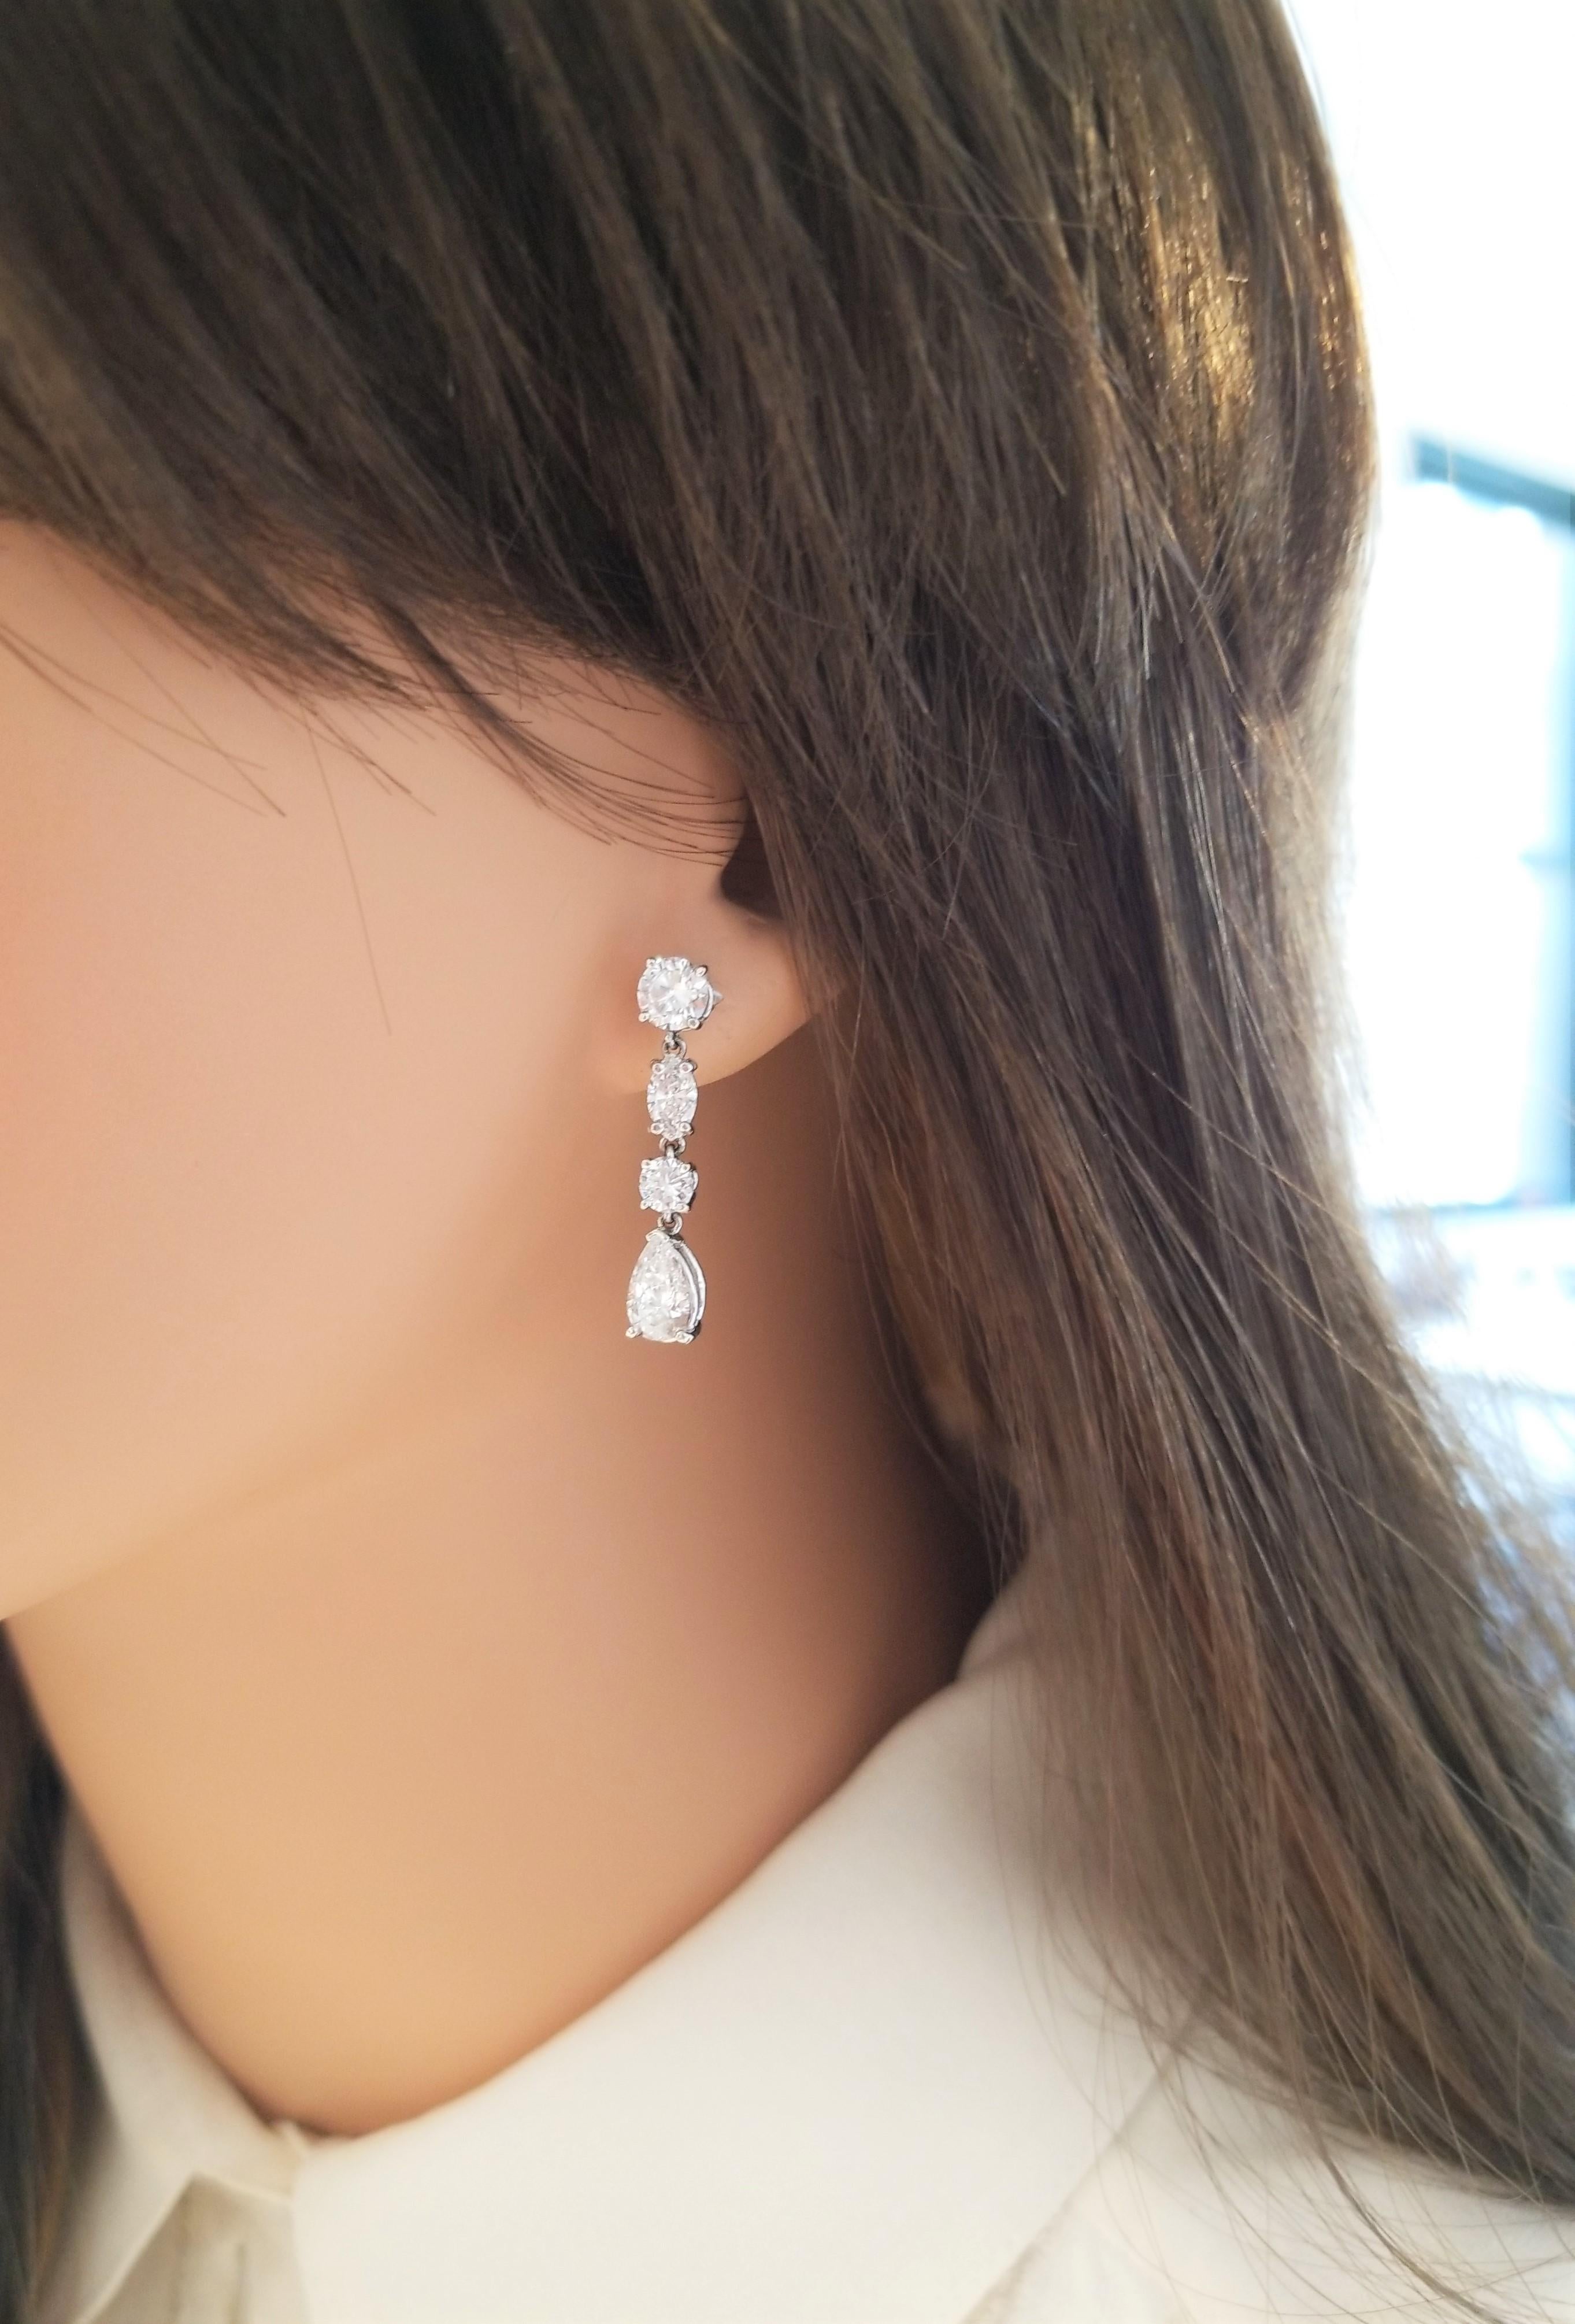 These are an incredible piece of diamond dangle earrings! 14 Karat white gold is the enduring metal that holds an attractive trio of diamond shapes. These stunning earrings feature round cut diamonds, marquise cut diamonds, and finishing with